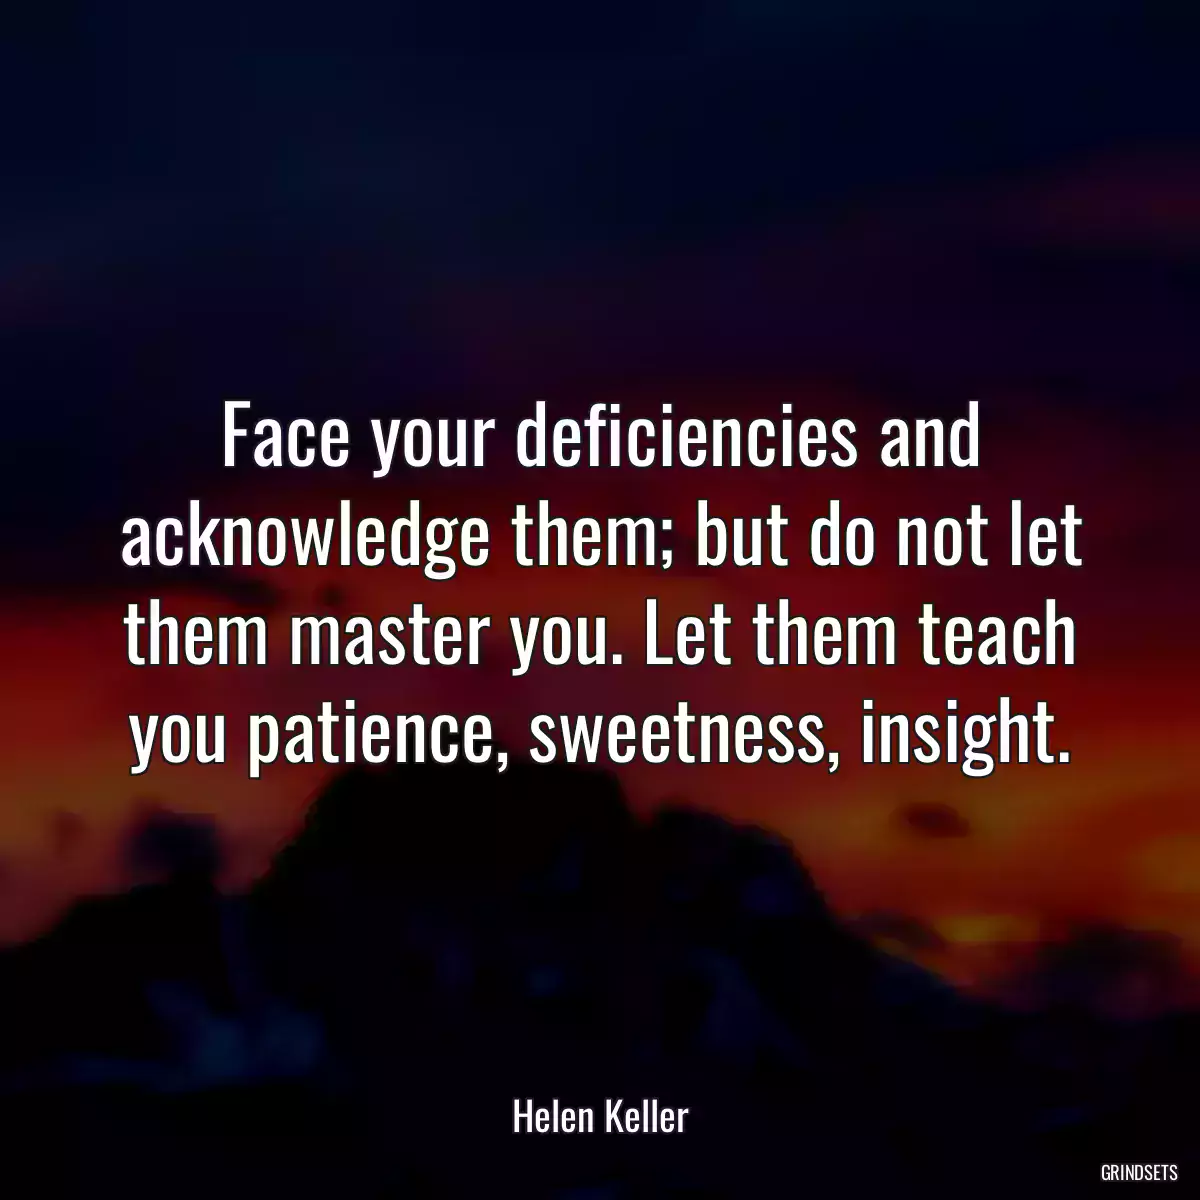 Face your deficiencies and acknowledge them; but do not let them master you. Let them teach you patience, sweetness, insight.